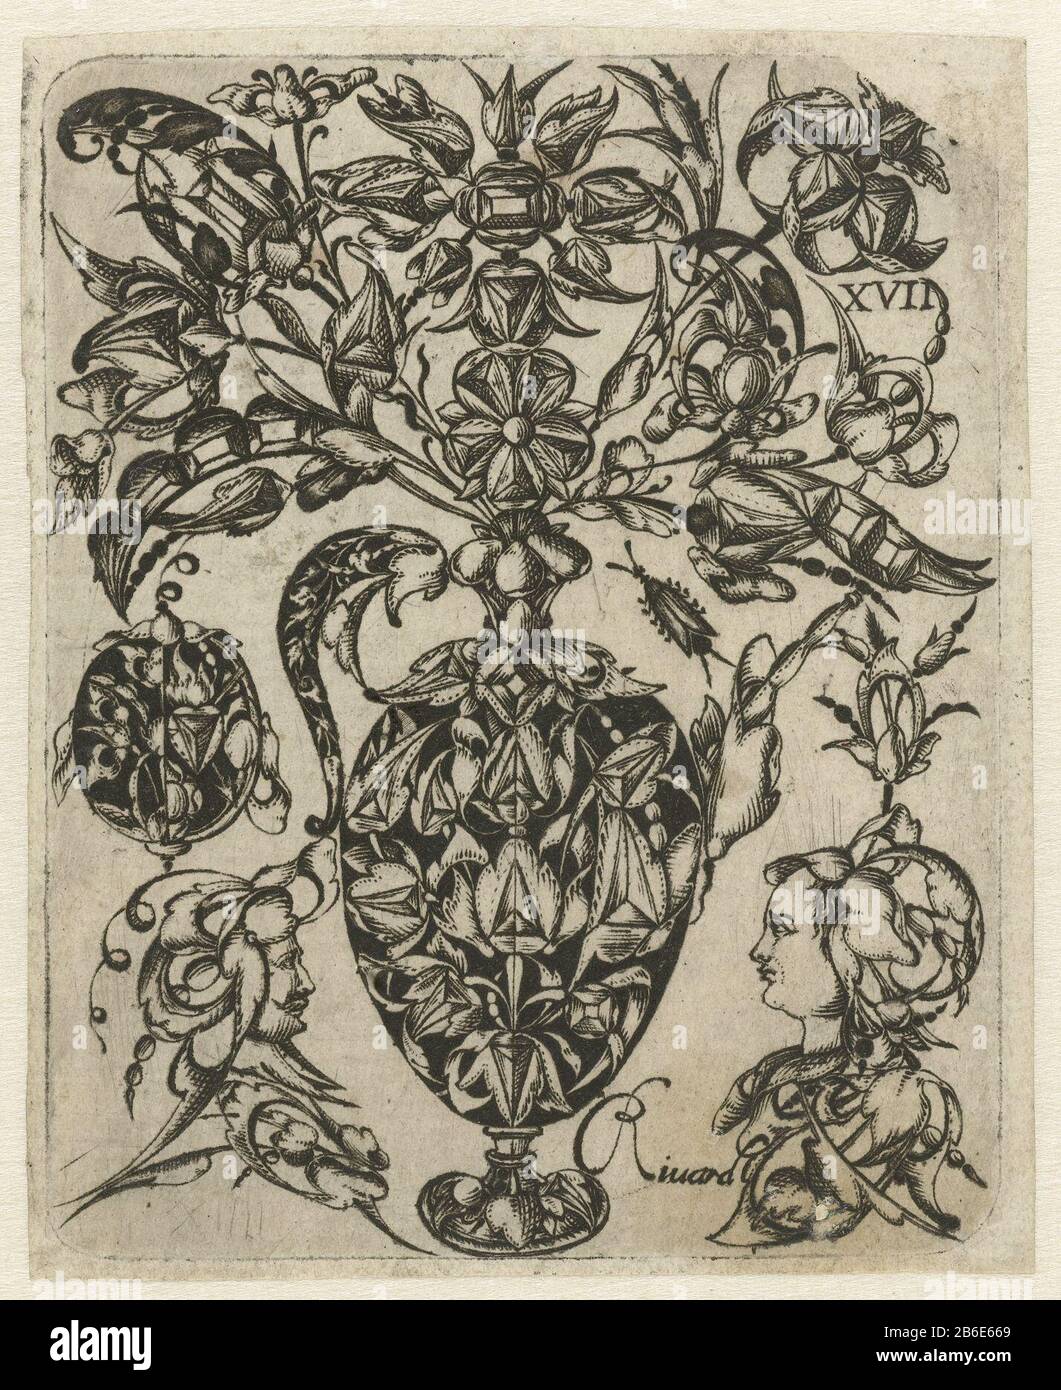 Ornament flower vase and with human heads Flower Ornament with vase and  human head object type: print ornament picture Serial Number:  XVIIObjectnummer: RP-P-2007-423 Manufacturer : printmaker Claude Rivard  (listed property) Date: ca.